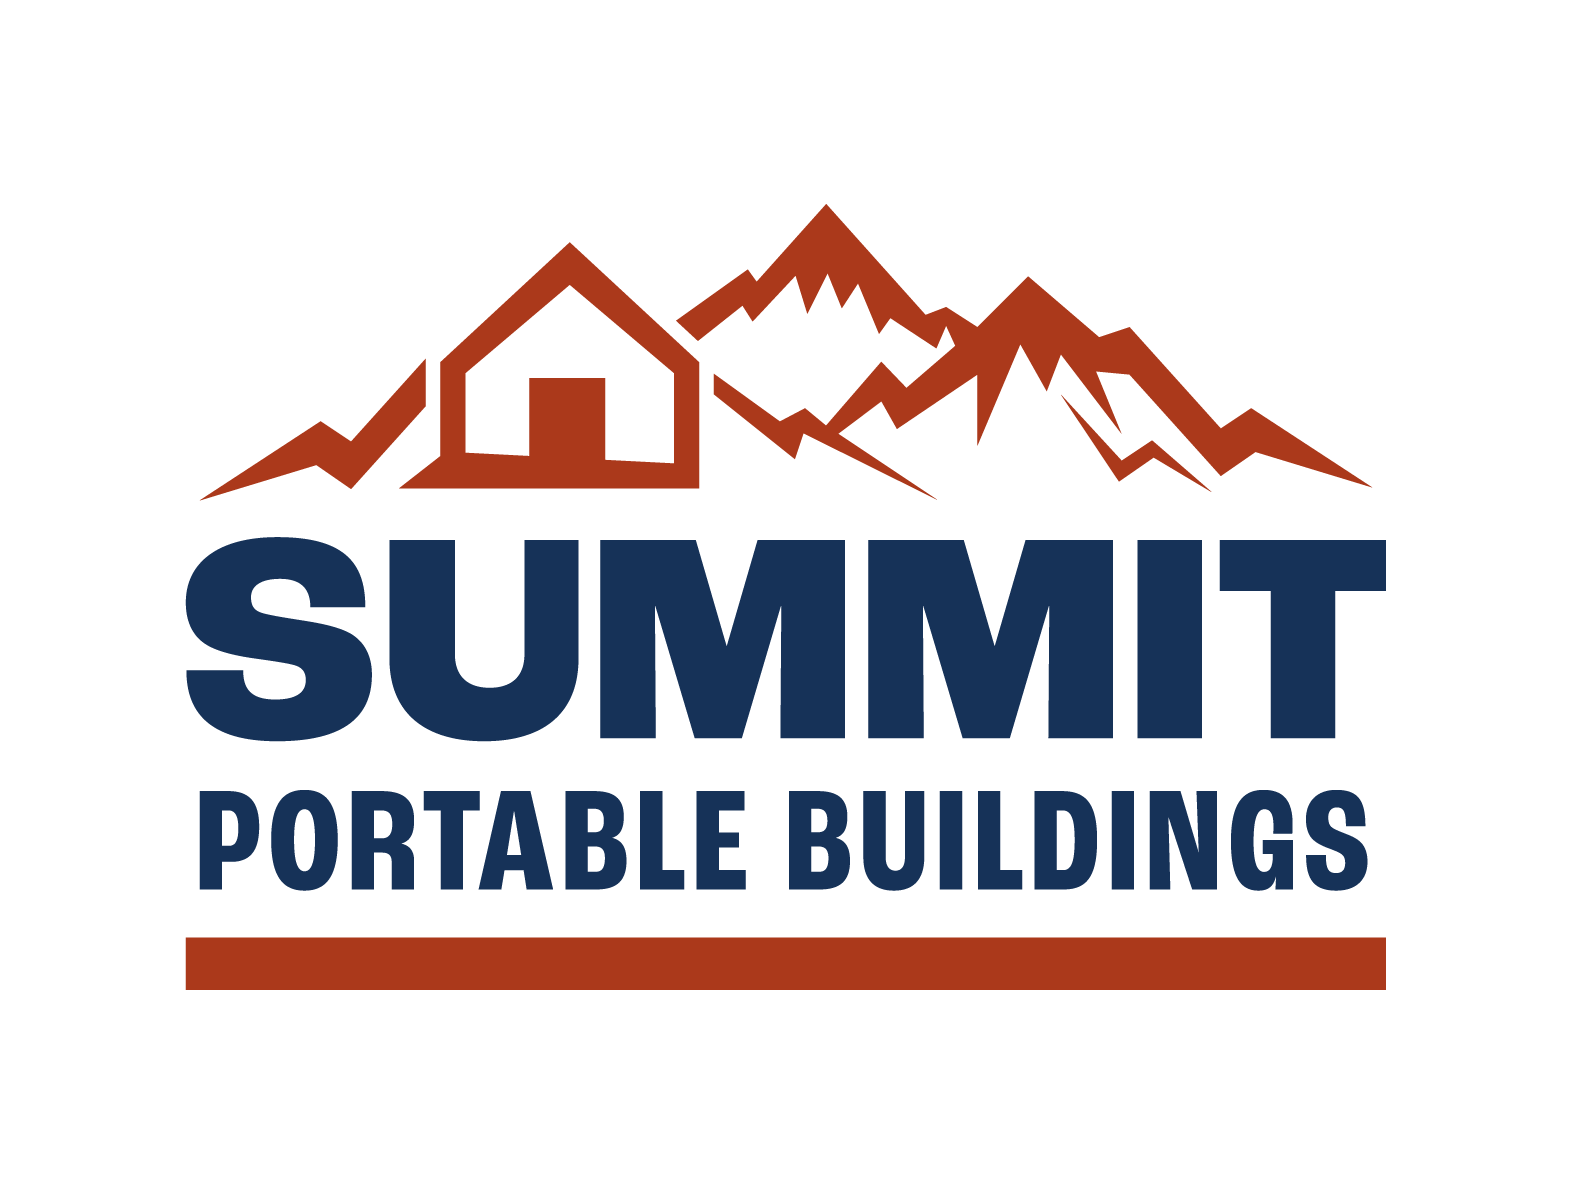 Summit portable buildings logo in red and navy